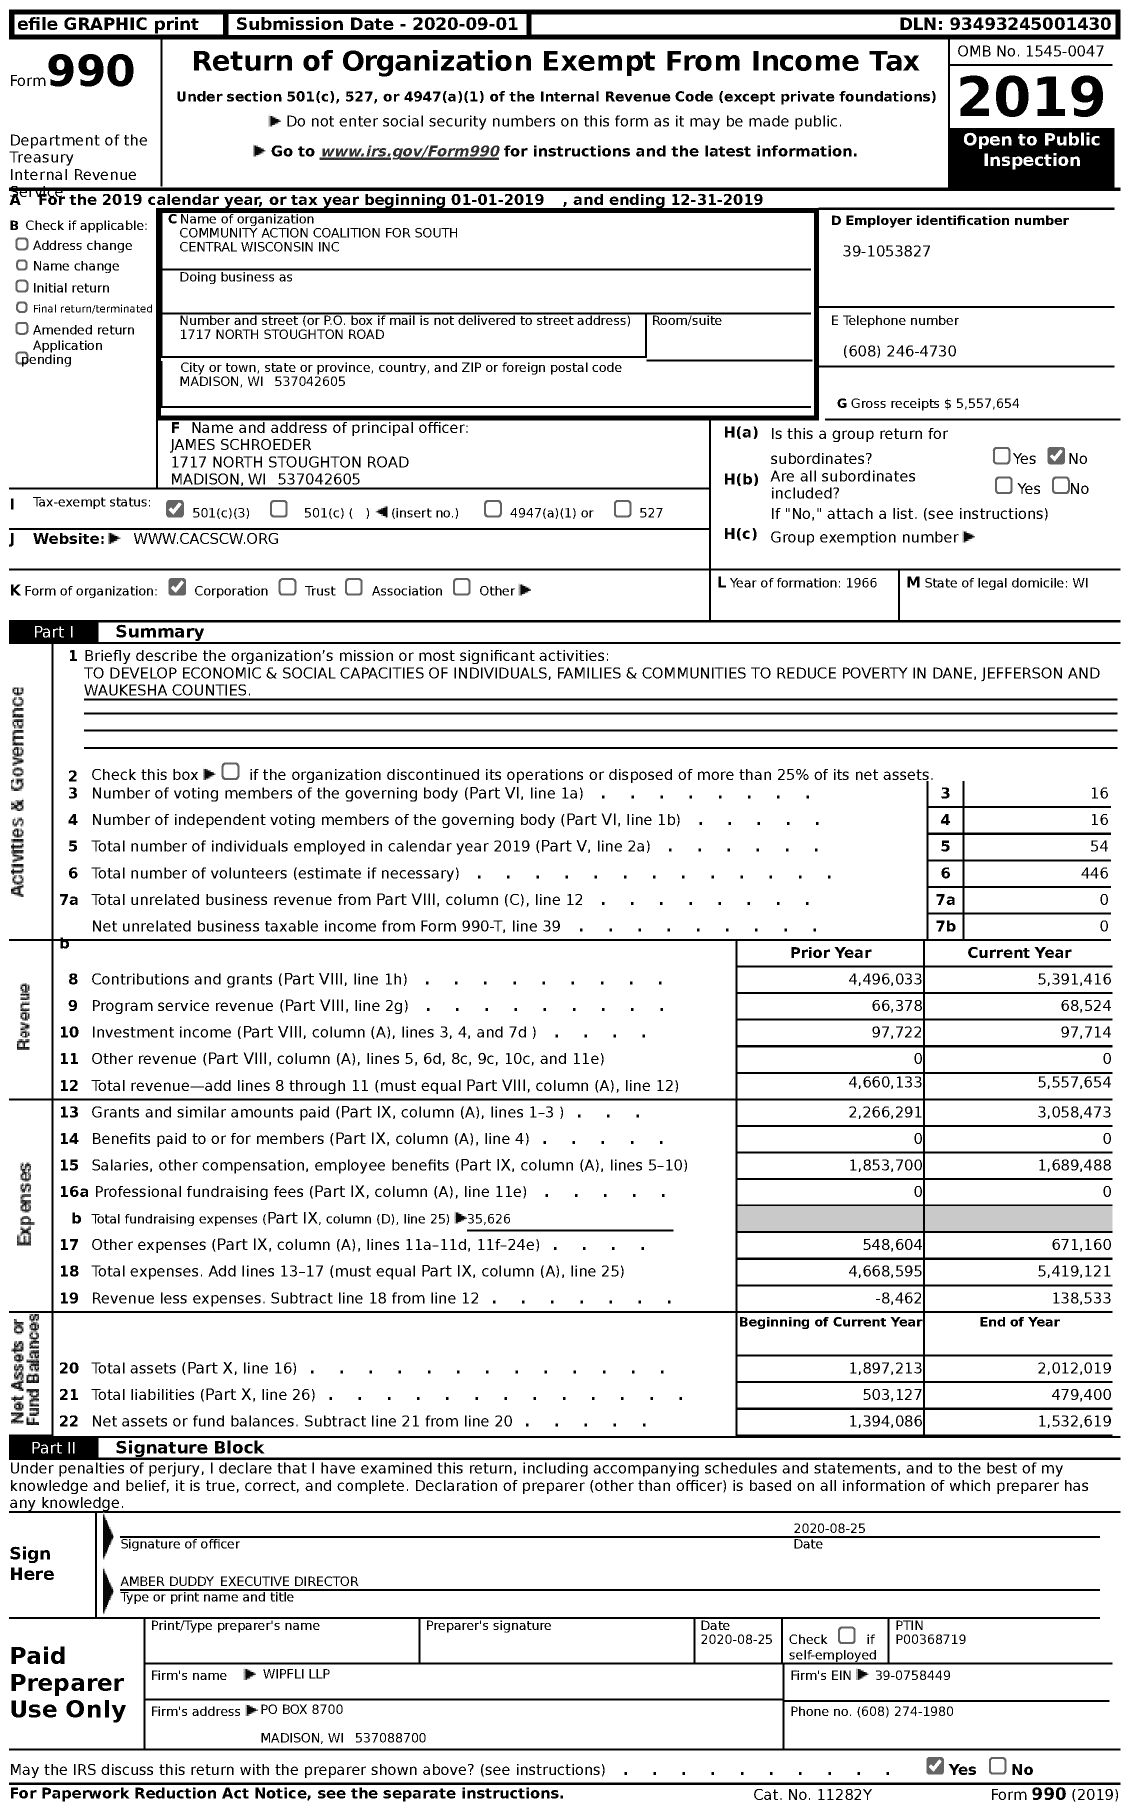 Image of first page of 2019 Form 990 for Community Action Coalition for South Central Wisconsin (CAC)